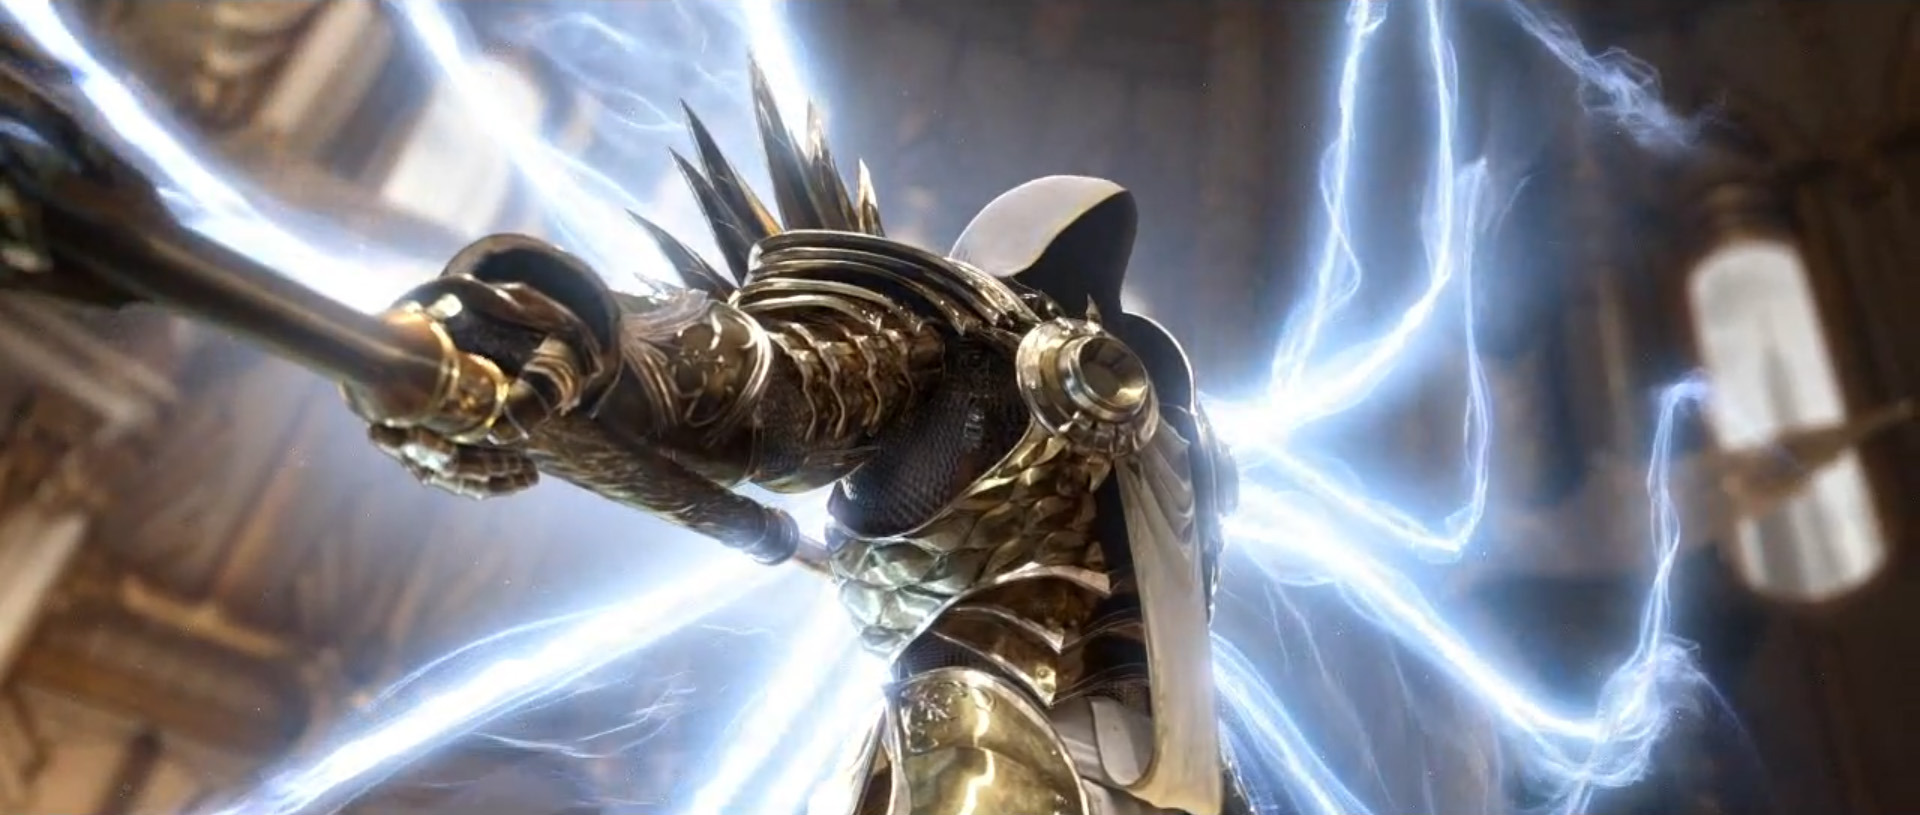 diablo iii where to find tyrael act iv